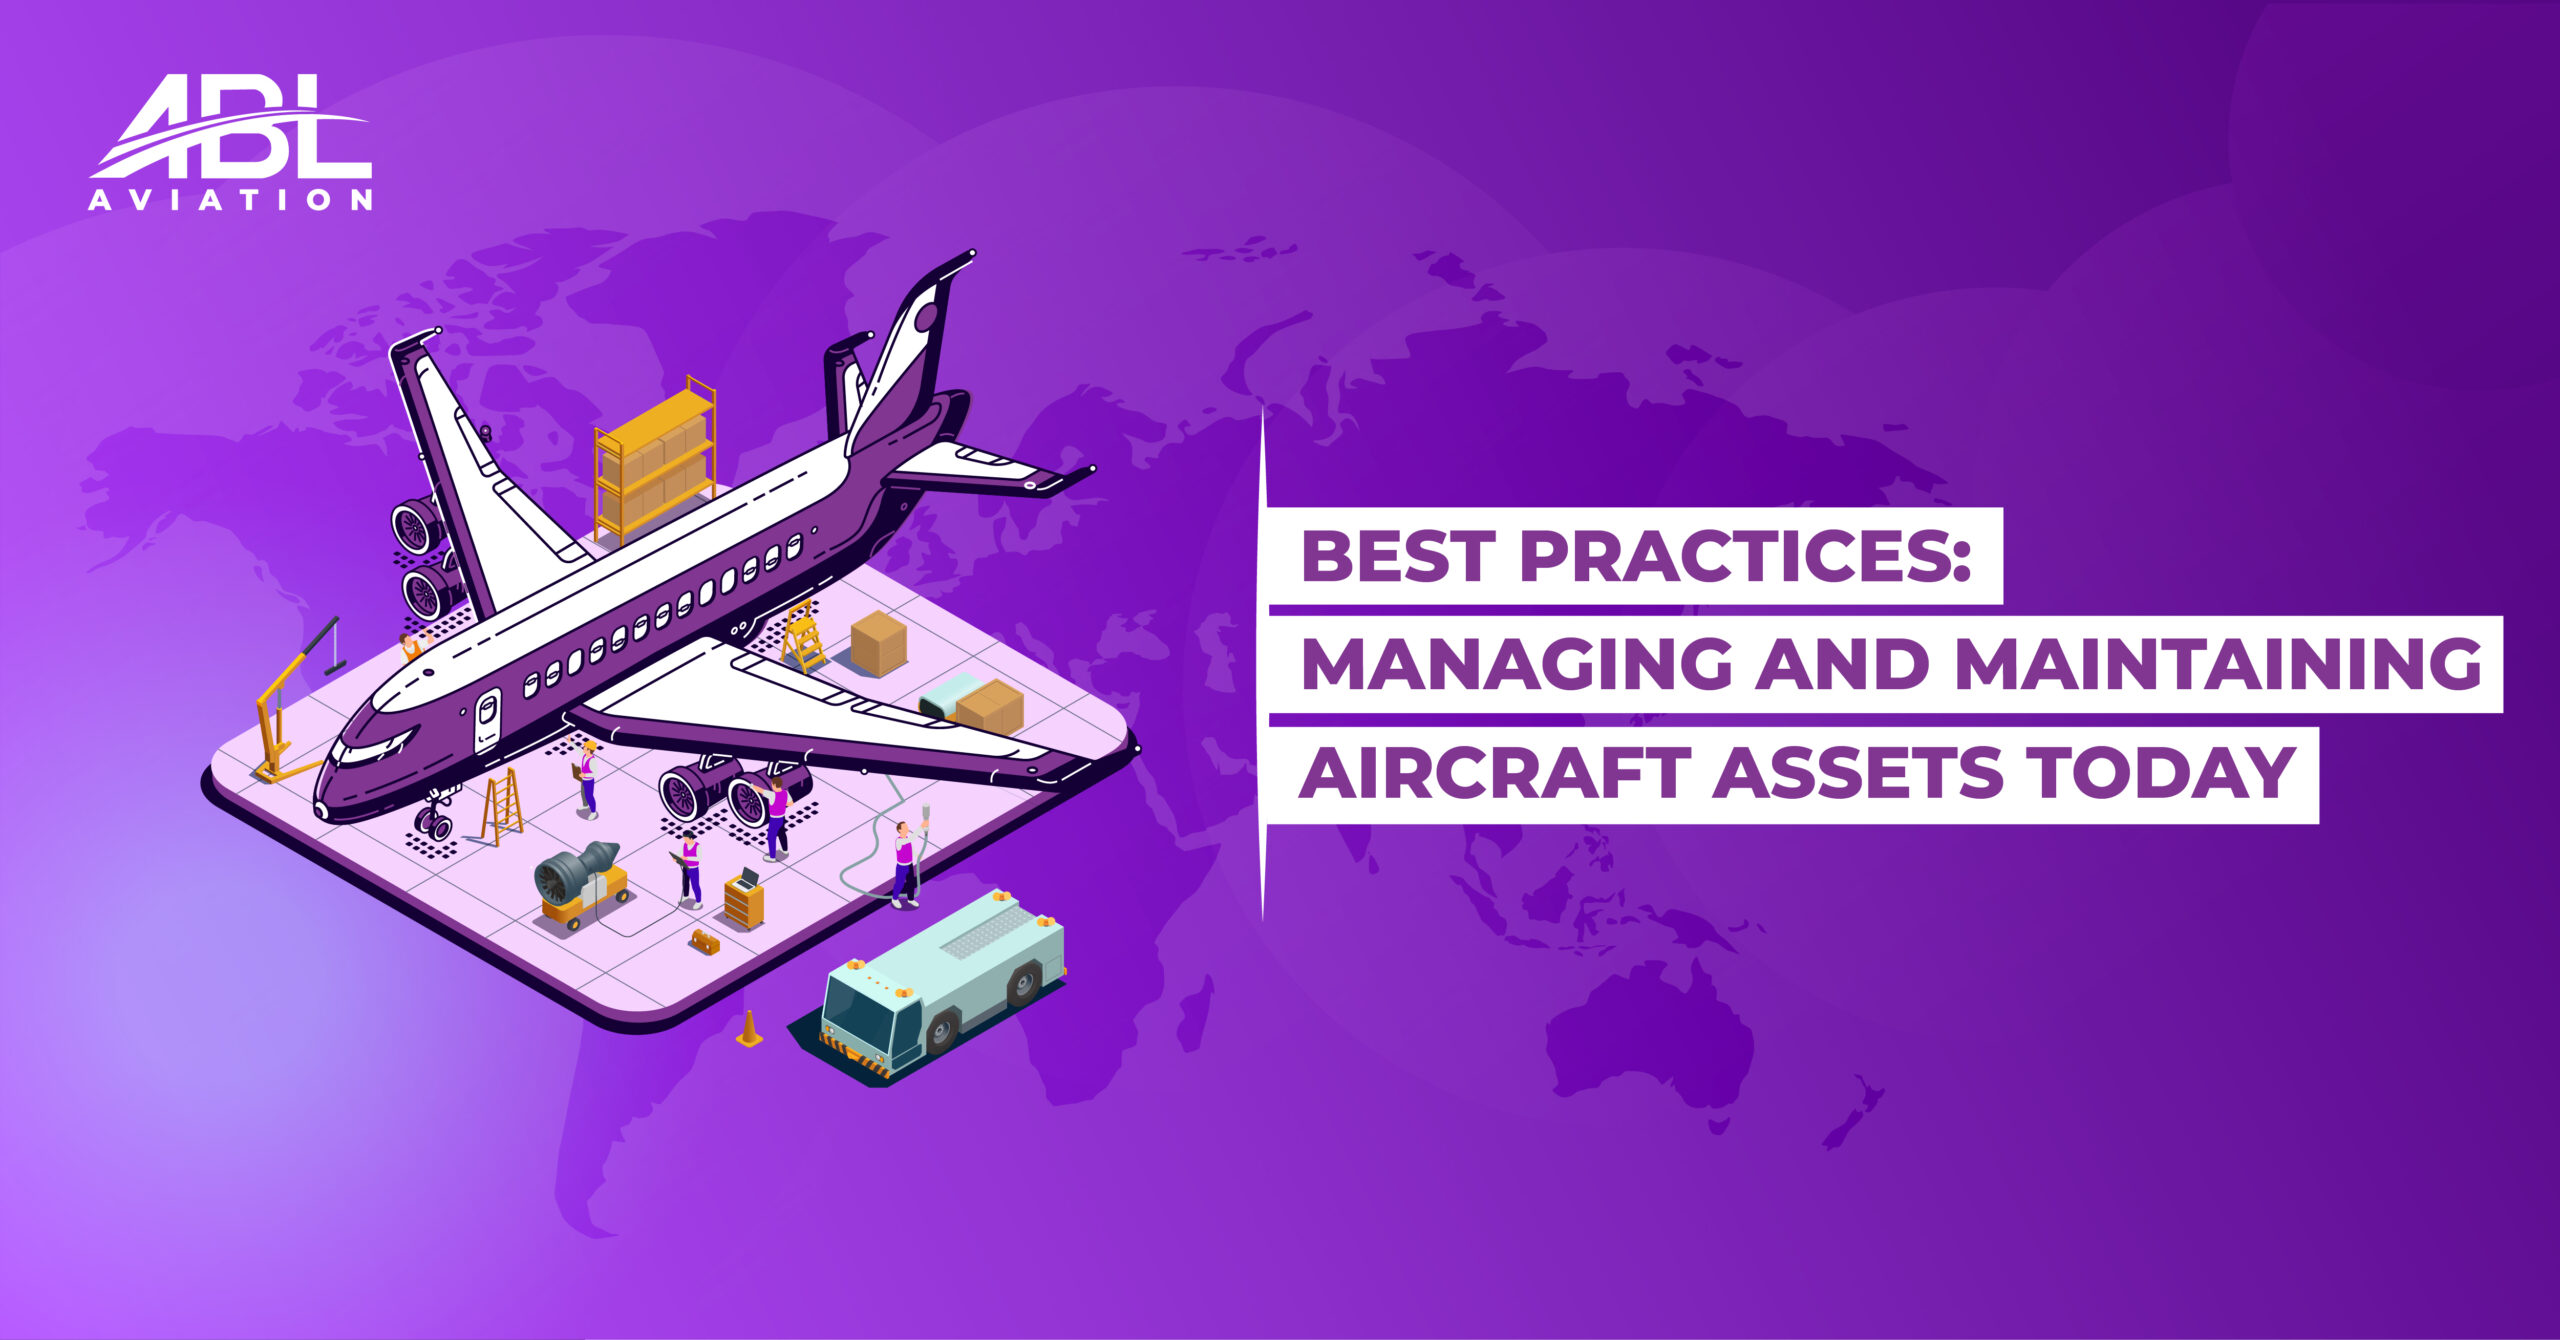 Best Practices for Managing and Maintaining Aircraft Assets Today